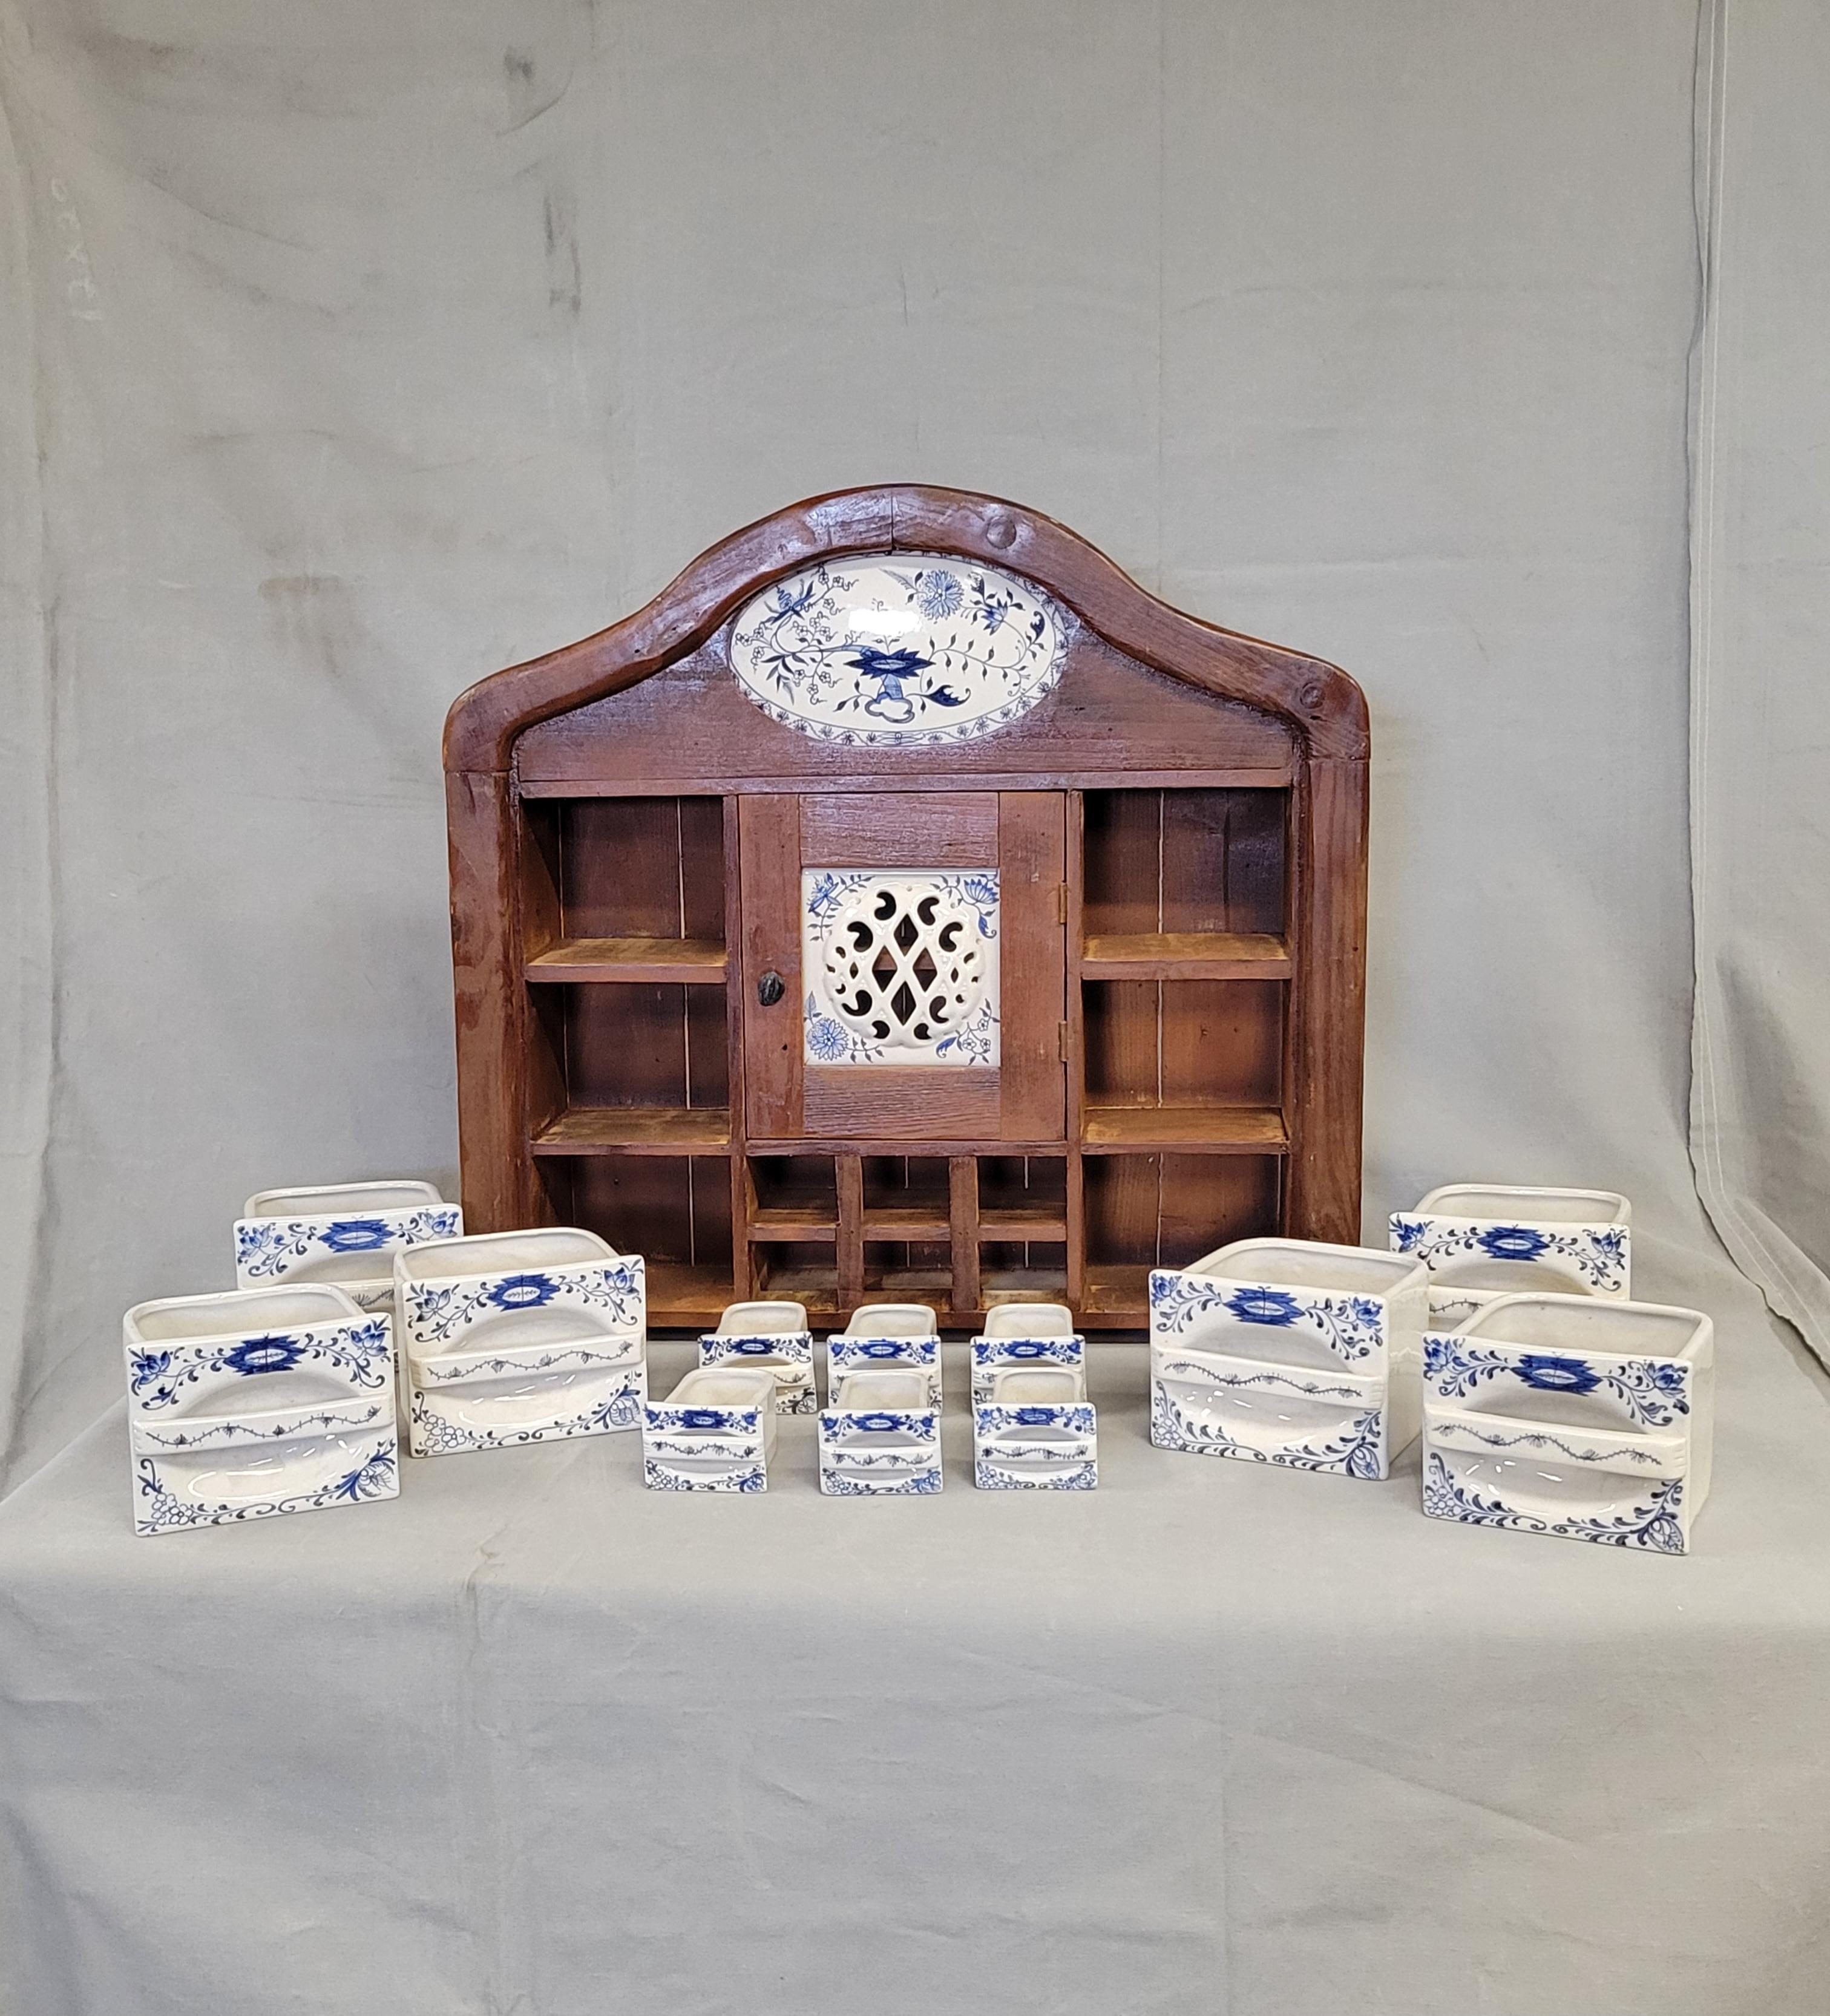 Vintage Dutch Spice Cabinet With Blue Onion Ceramic Inserts In Good Condition For Sale In Centennial, CO